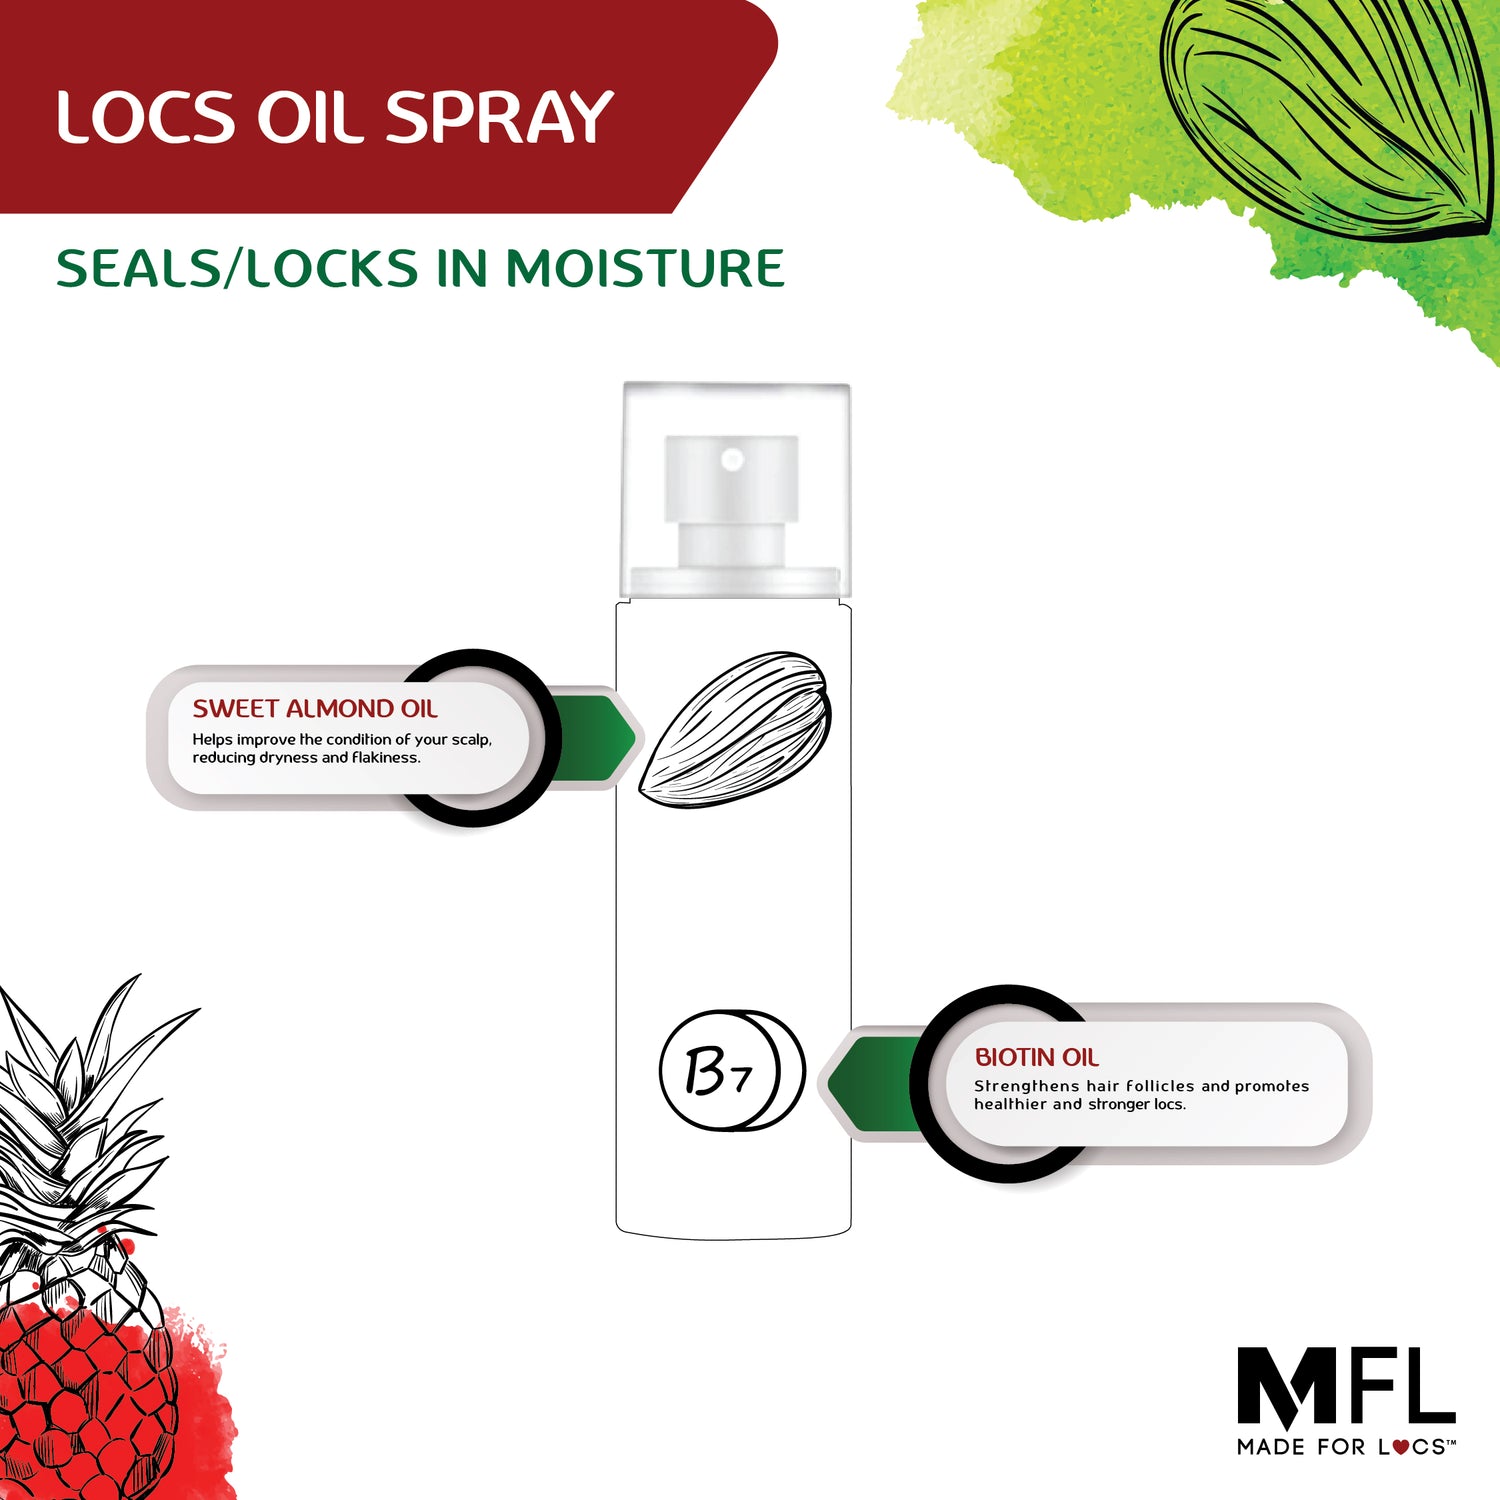 MADE FOR LOCS OIL SPRAY MAIN INGREDIENTS